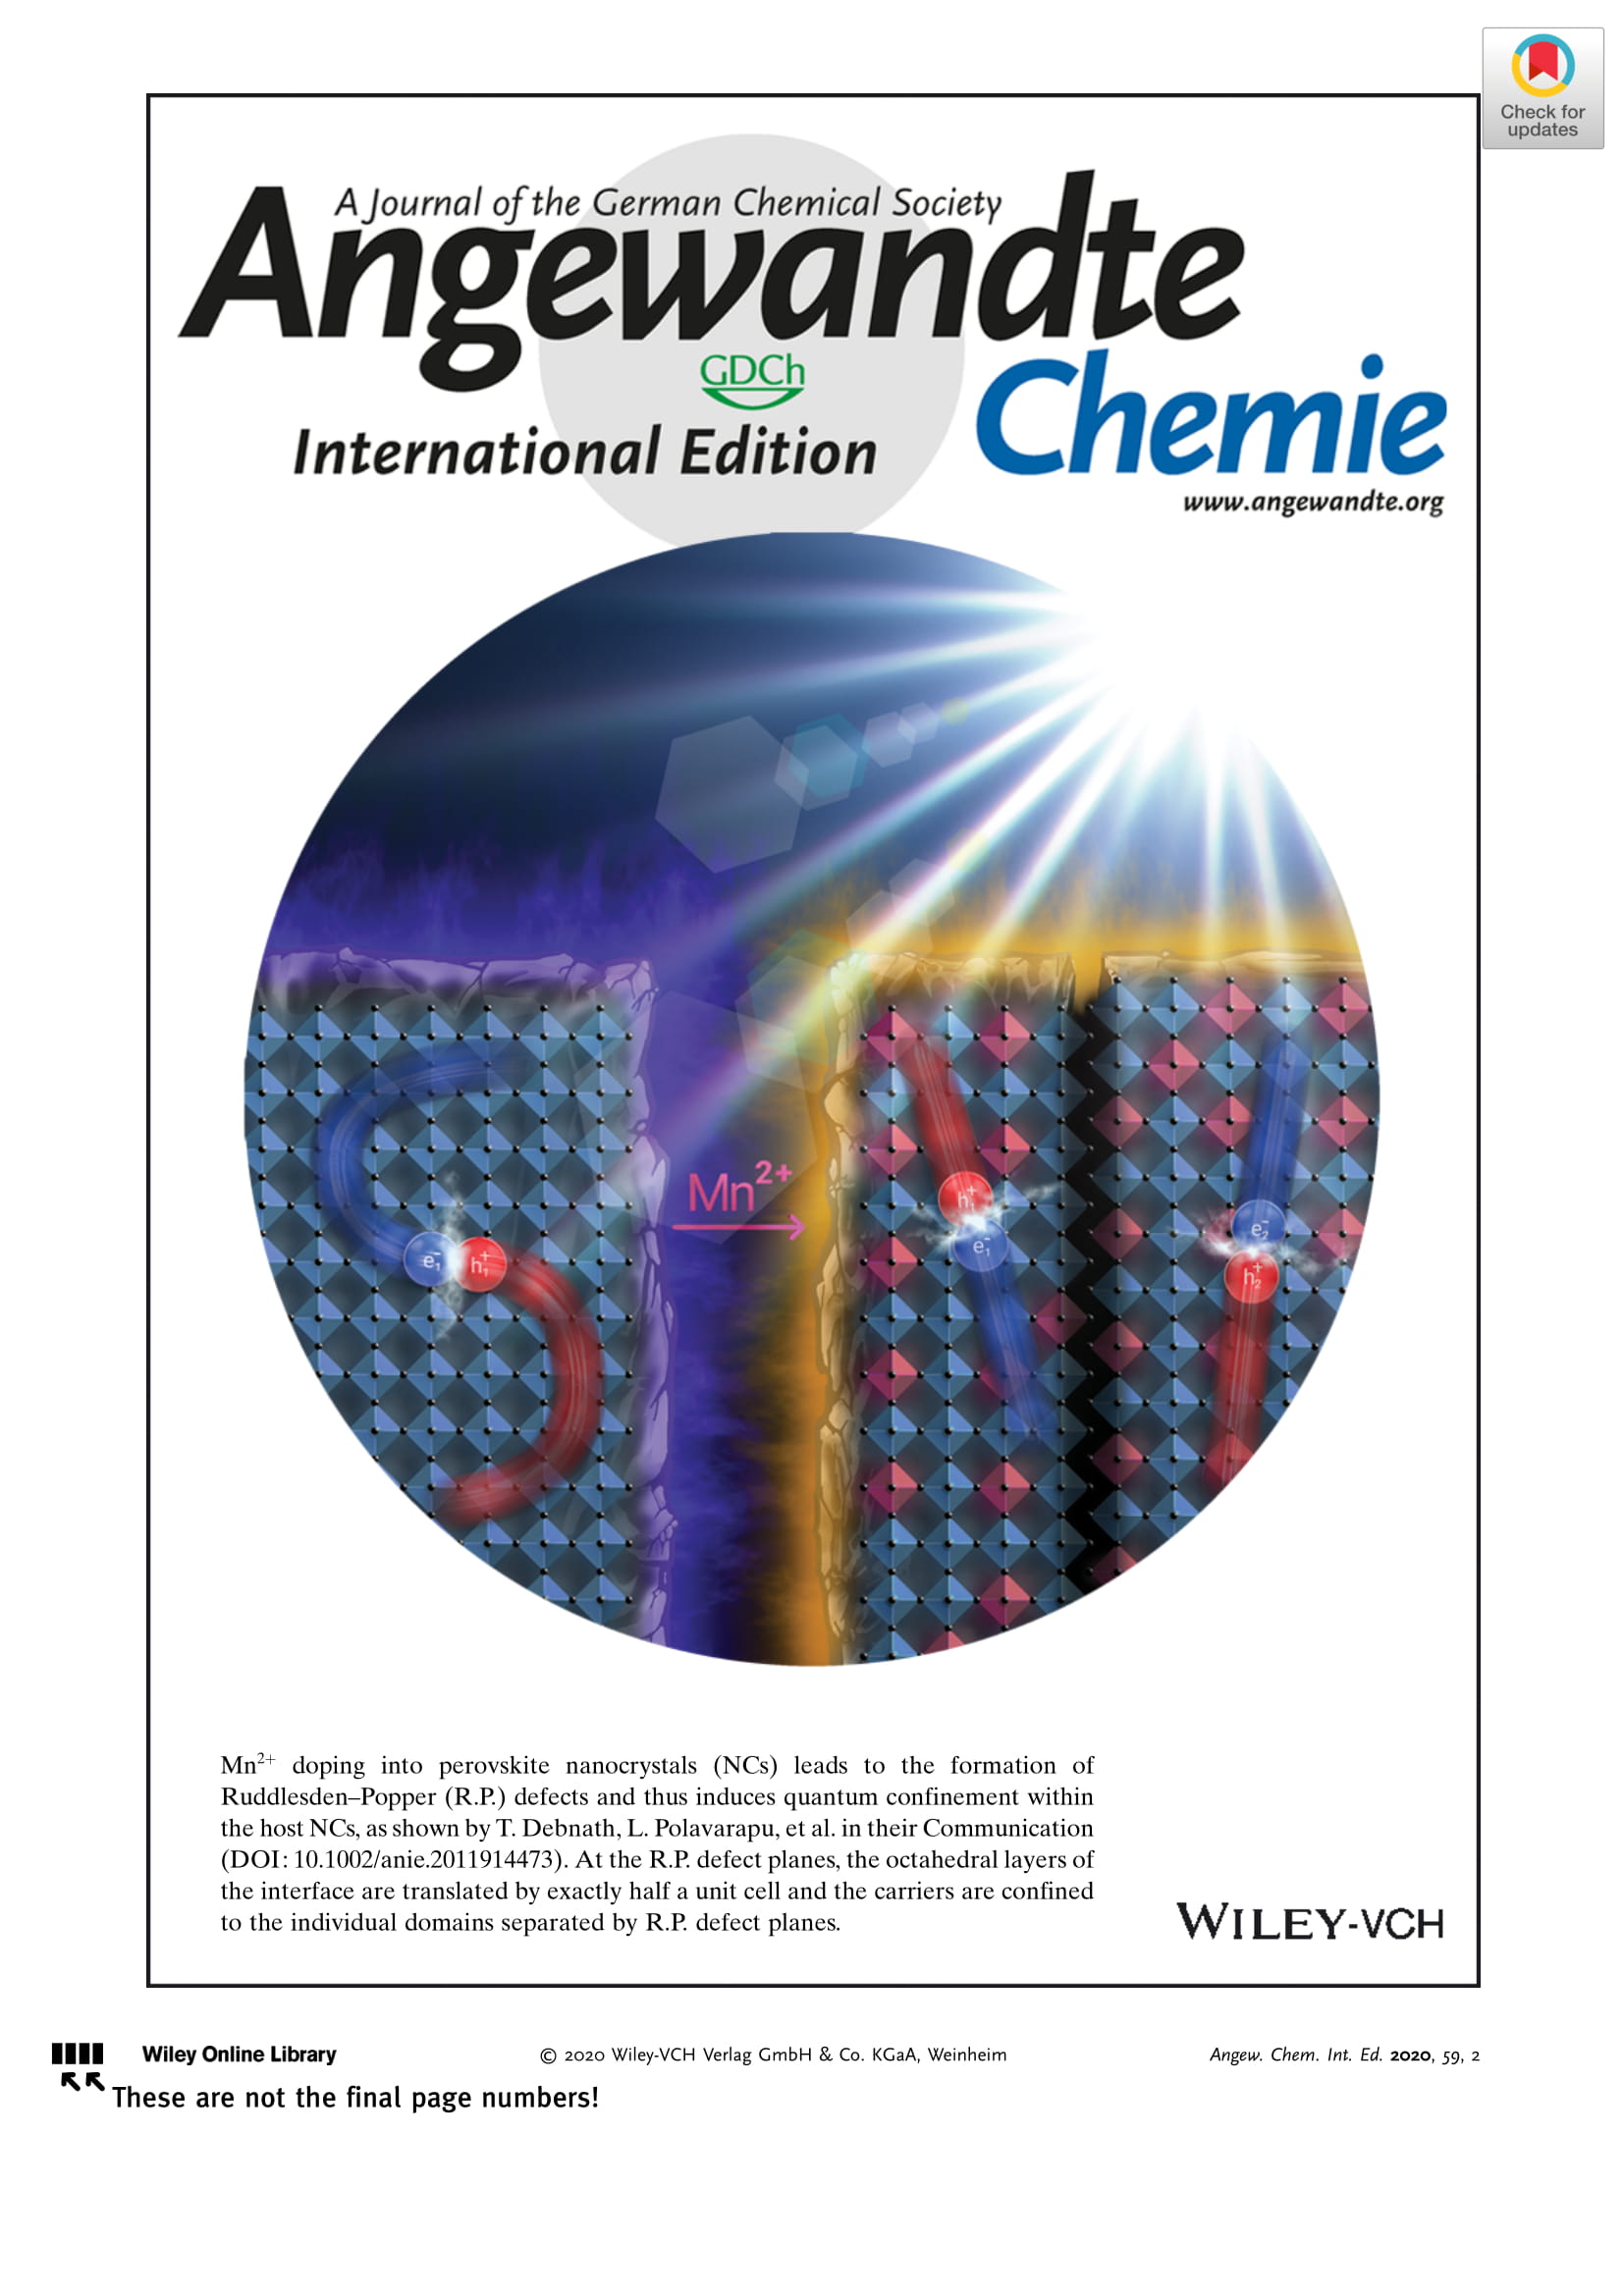 New cover image in Angewandte Chemie International Edition